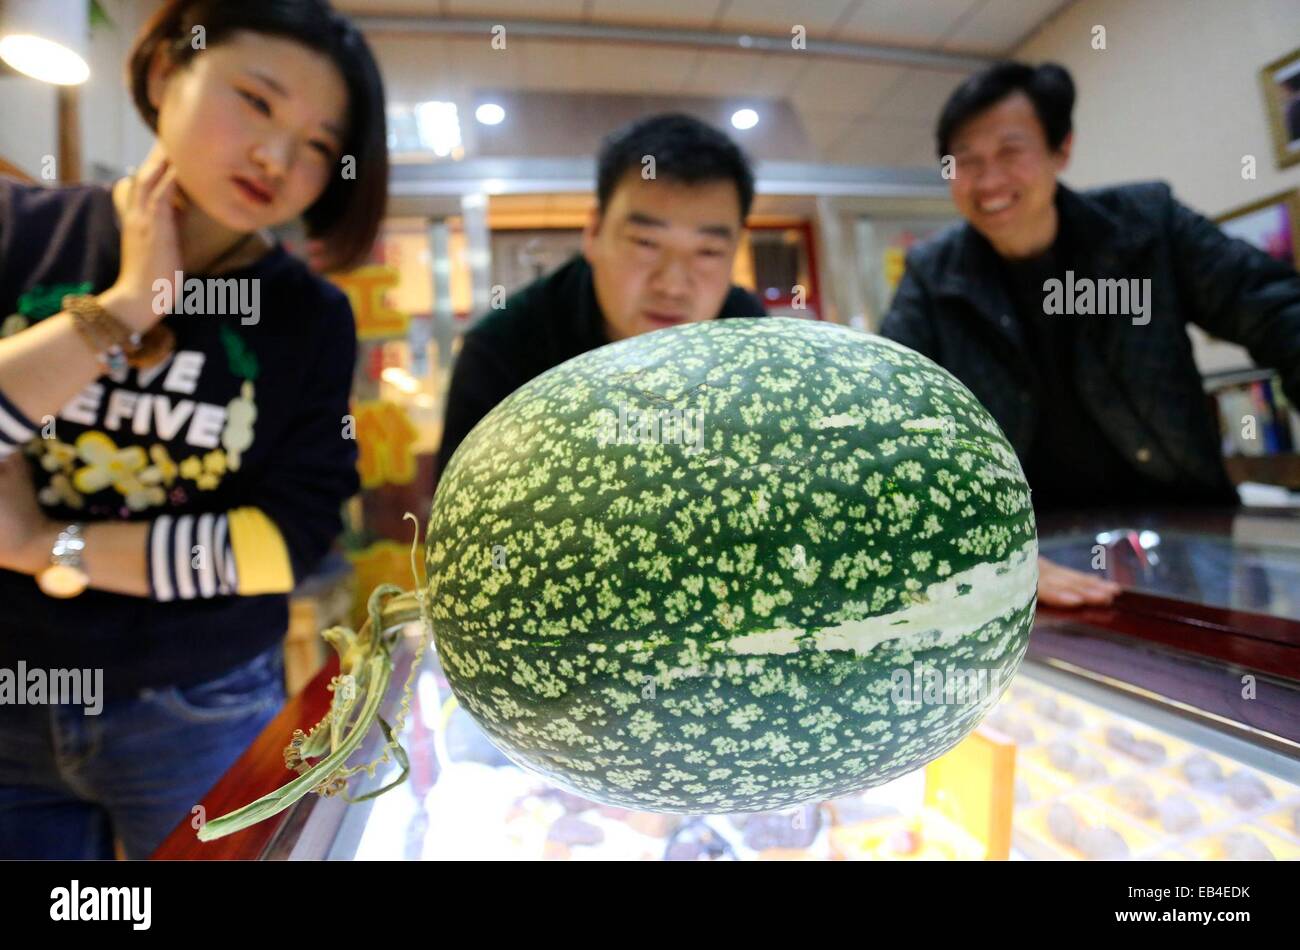 A strange melon which looks like watermelon but grows calabash's vine and wax gourd's seed is showed in Zhengzhou, Henan, China on 25th November, 2014. The scientist says it calls Cucurbita ficifolia. Stock Photo